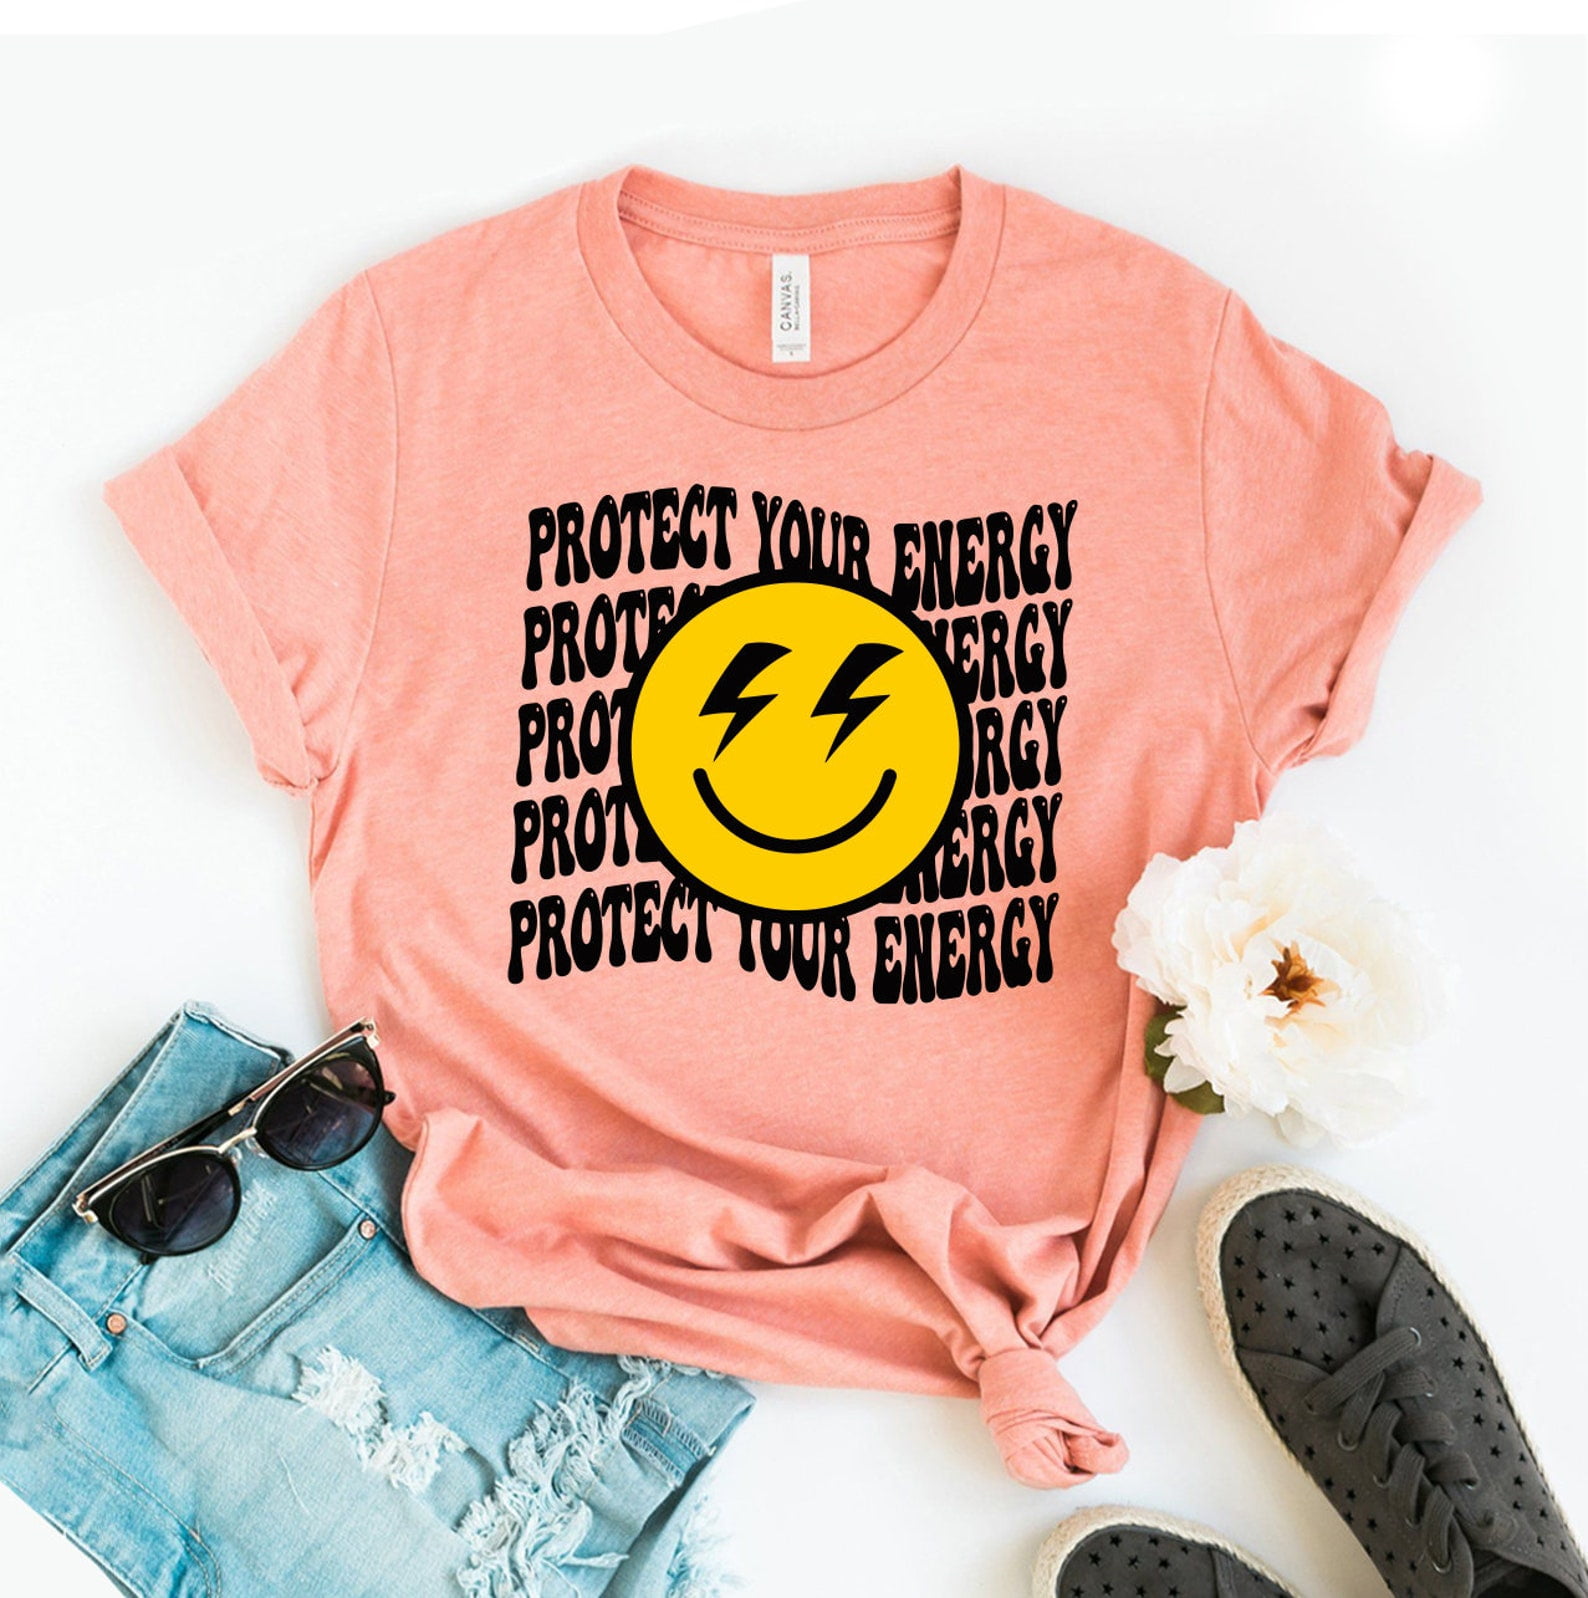 Your Energy T-shirt Trendy Clothes Shirt Lgbtq Right Tee Good Top Smiley Face Gift Graphic Spiritual - Walmart.com